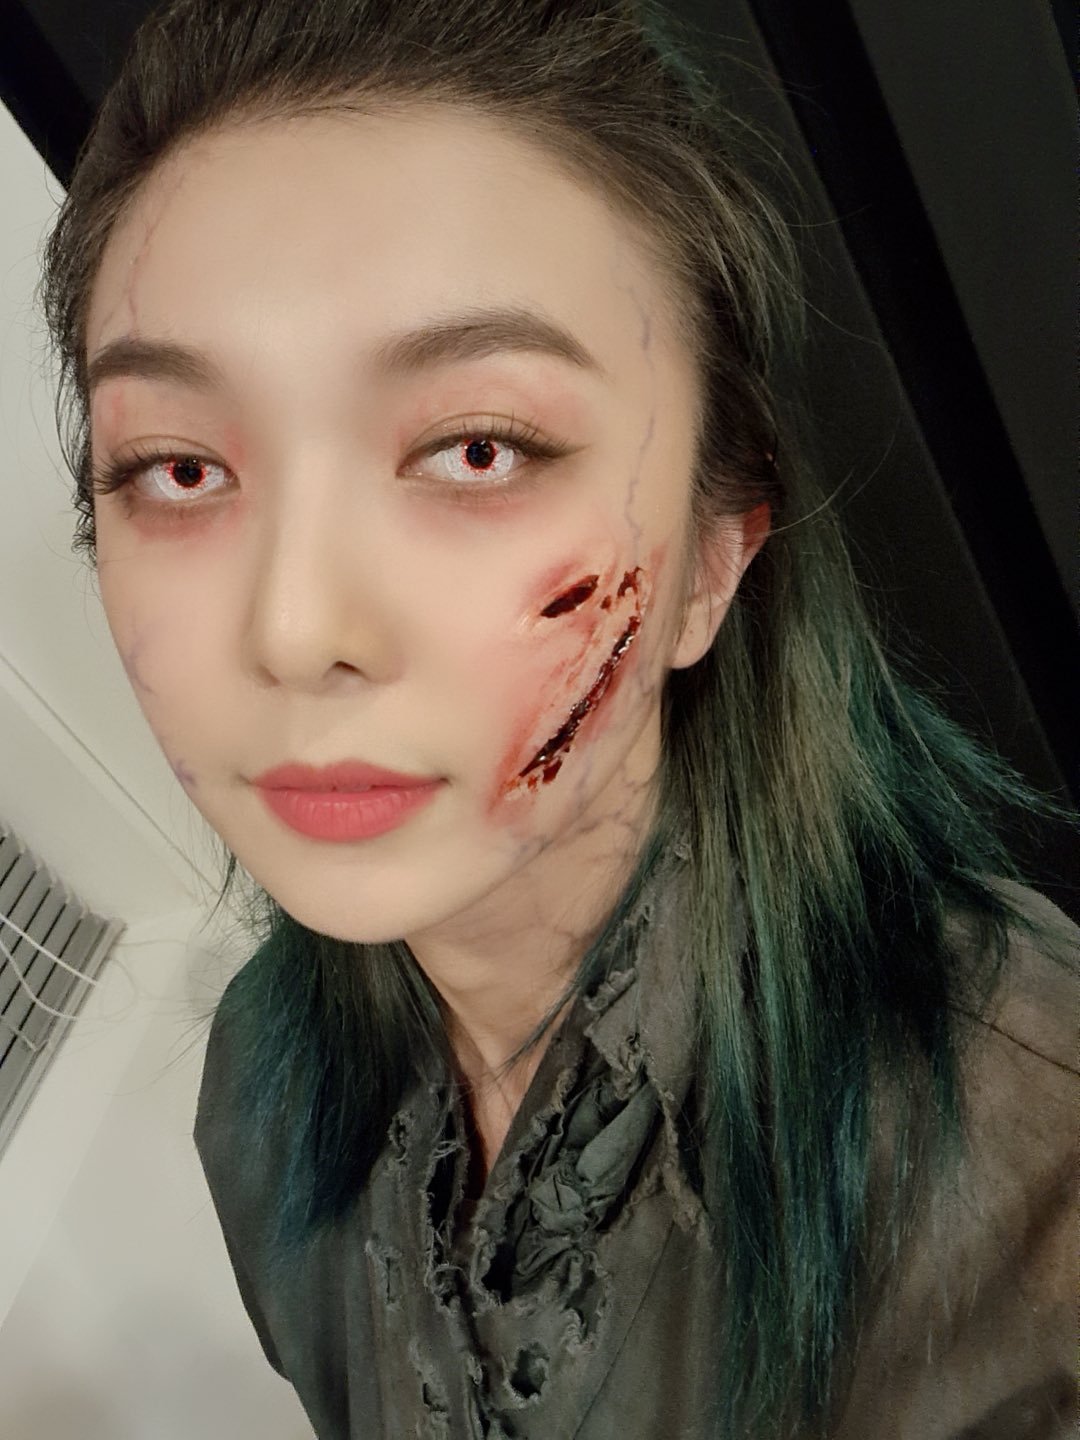 [201021] hf_dreamcatcher Twitter Update (½):
“[🎁 ] Look at Dreamies’ photos before you go❤️
‘BOCA’ MV achievement event Behind Selfies revealed (Zombie ver.)”
Transl: 7-Dreamers | Please do not take translation without credit